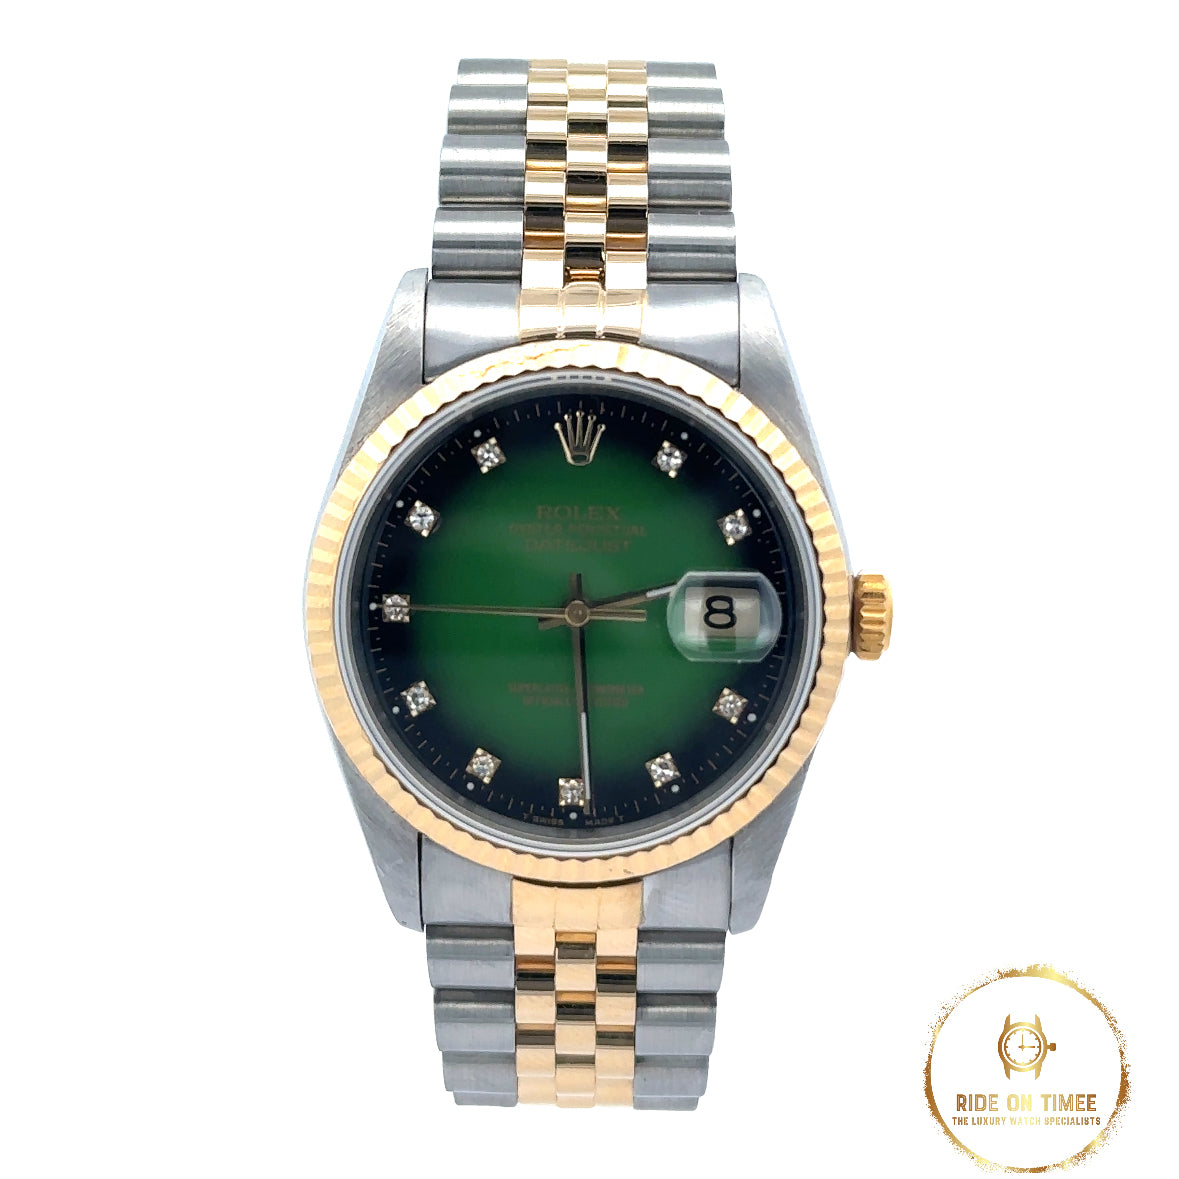 Rolex Datejust 36 Factory Green Vignette Diamond Dial ‘16233’ - Ride On Timee